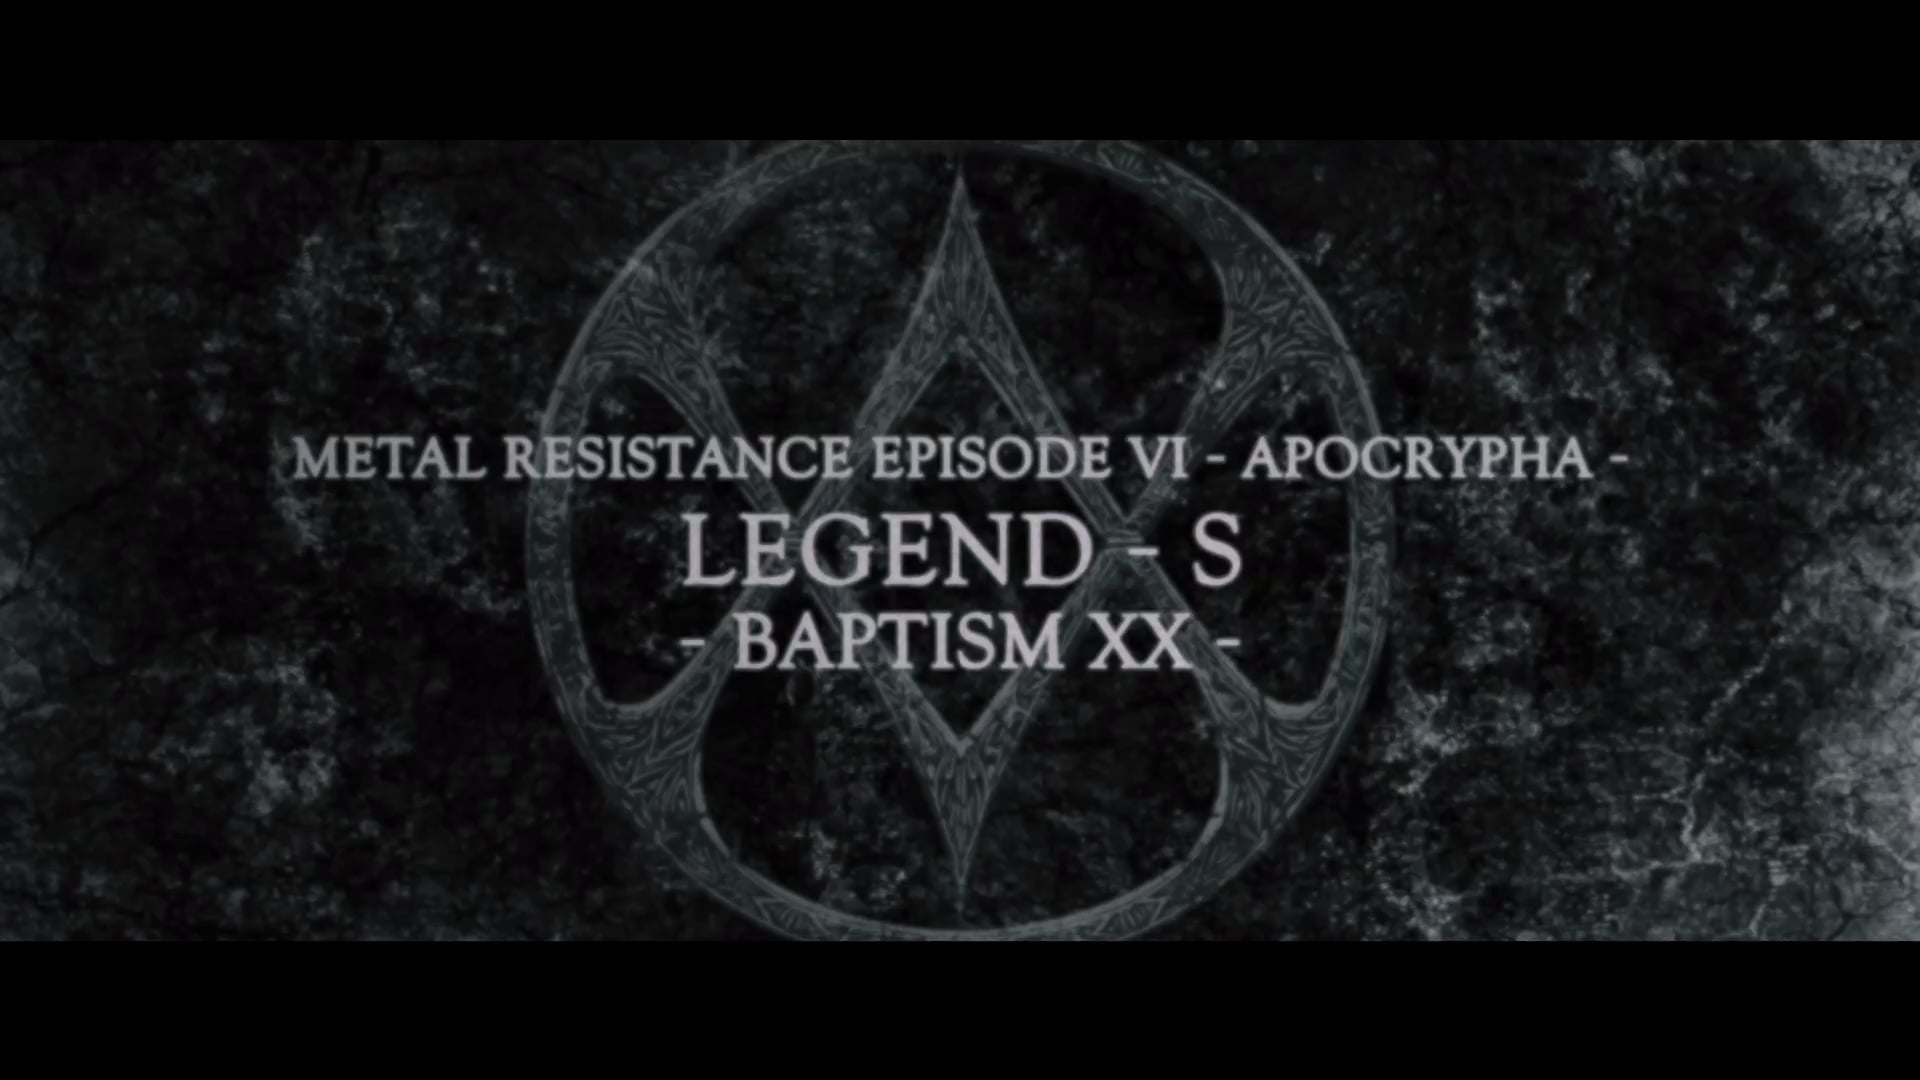 [Blu ray rip] BABYMETAL - LEGEND - S - BAPTISM XX - IN THE NAME OF